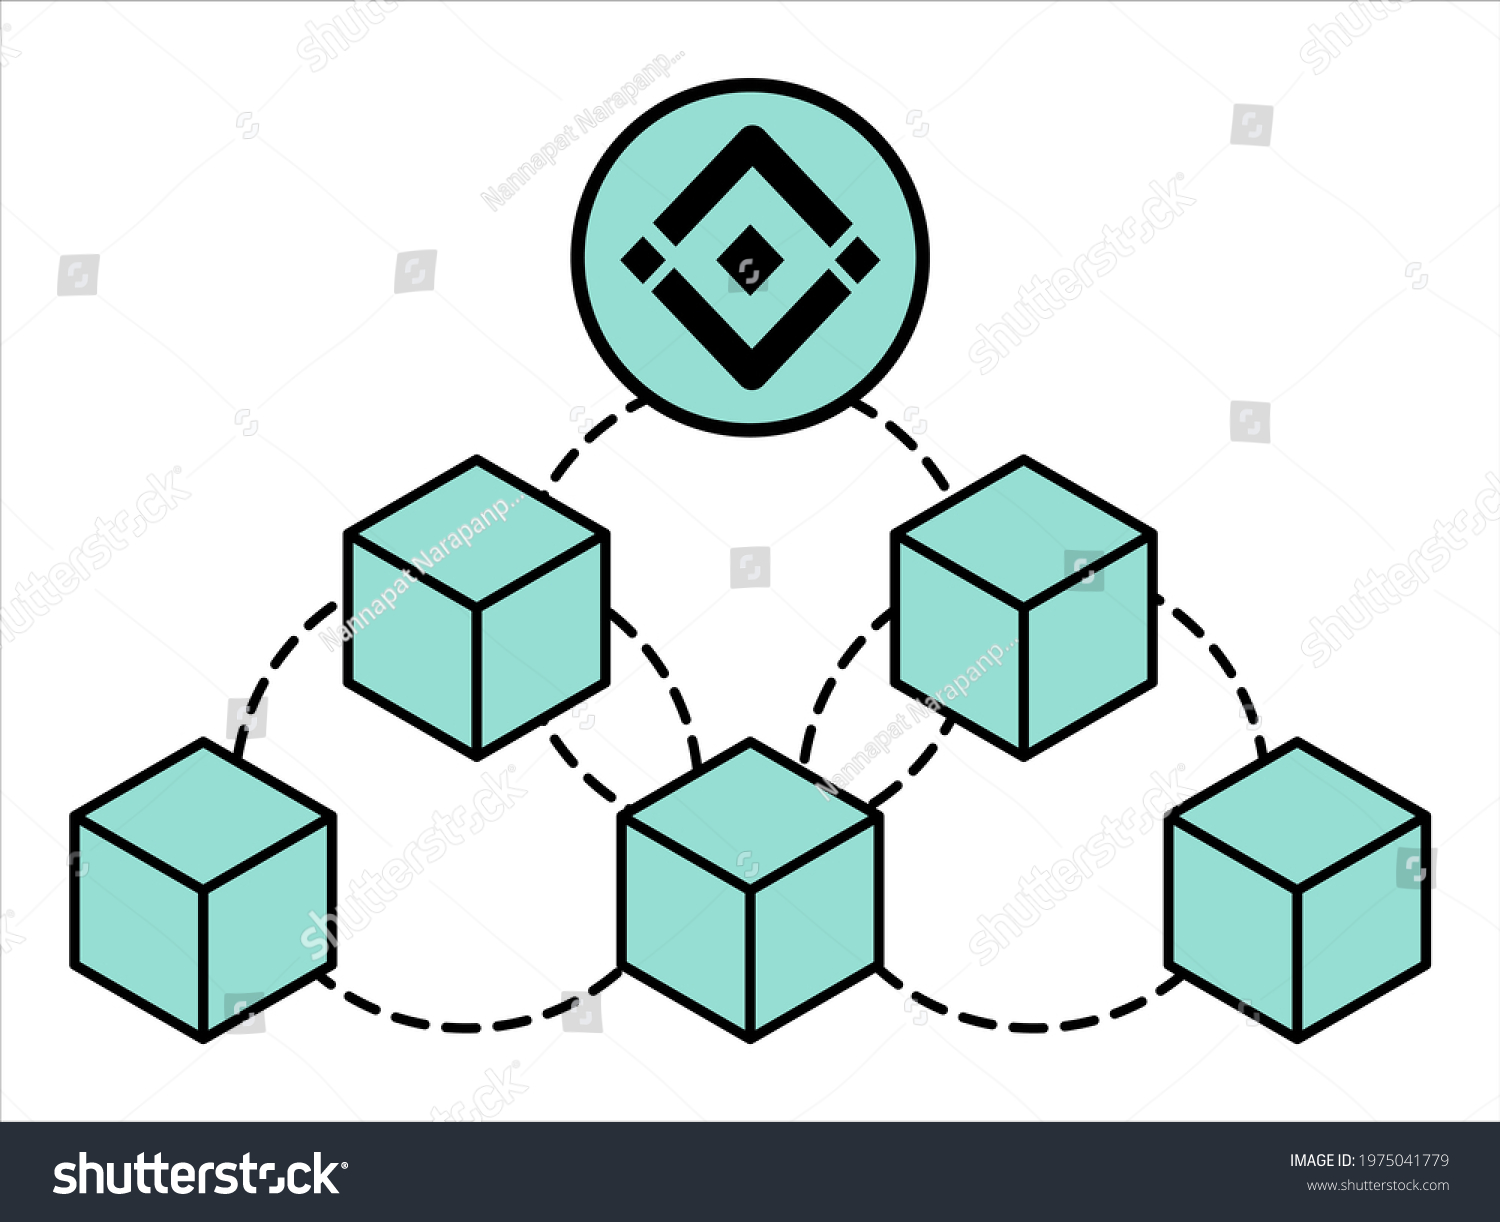 SVG of Blockchain technology, binance chain and euthereum chain vector illustration in infographic icon style svg